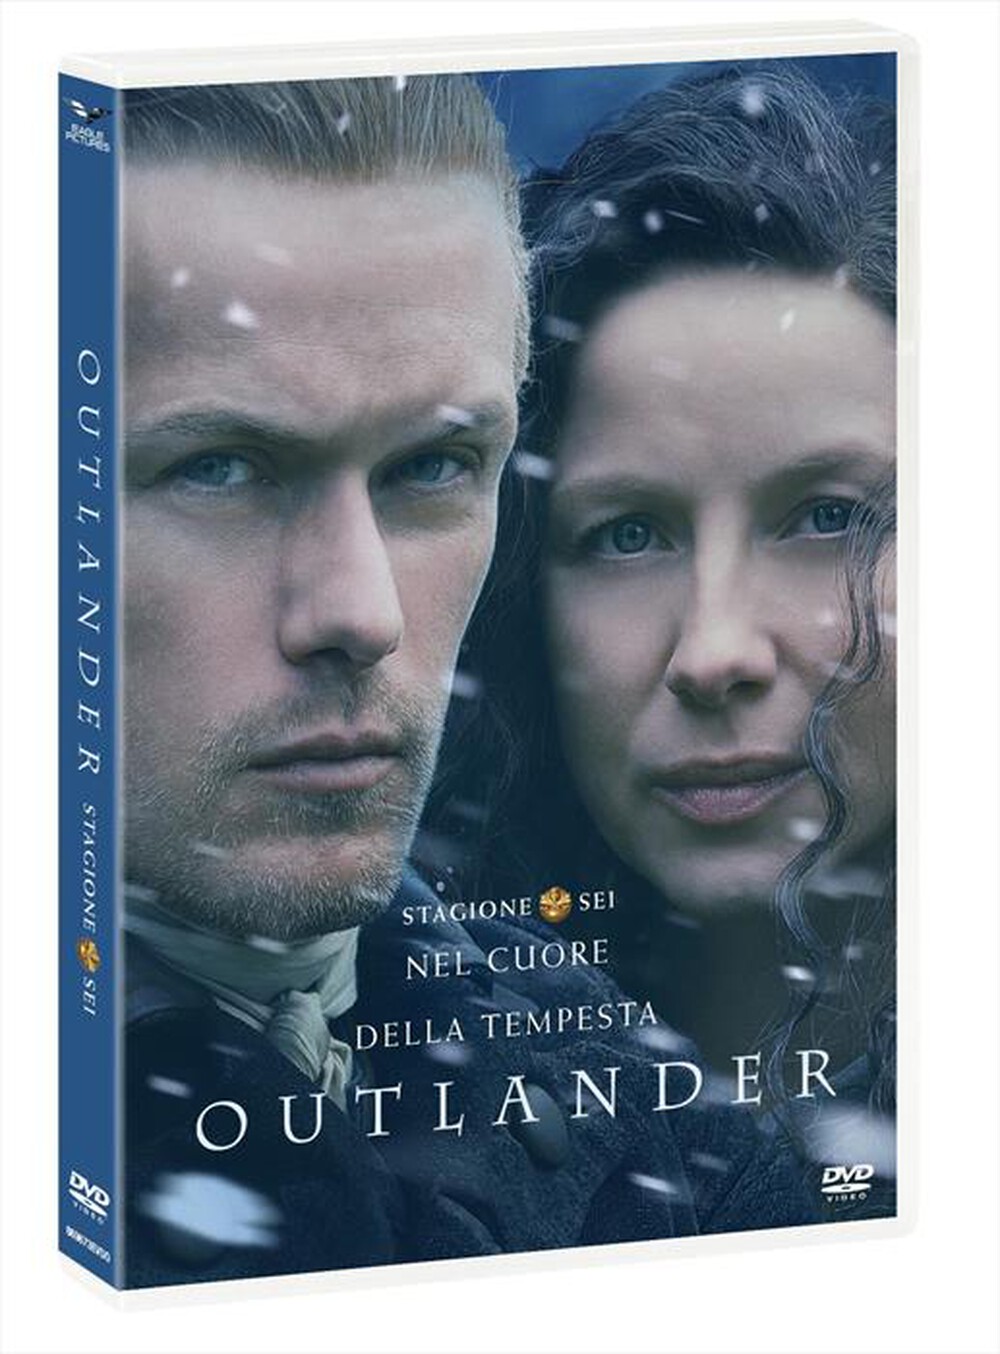 "SONY PICTURES - Outlander - Stagione 06 (4 Dvd)"